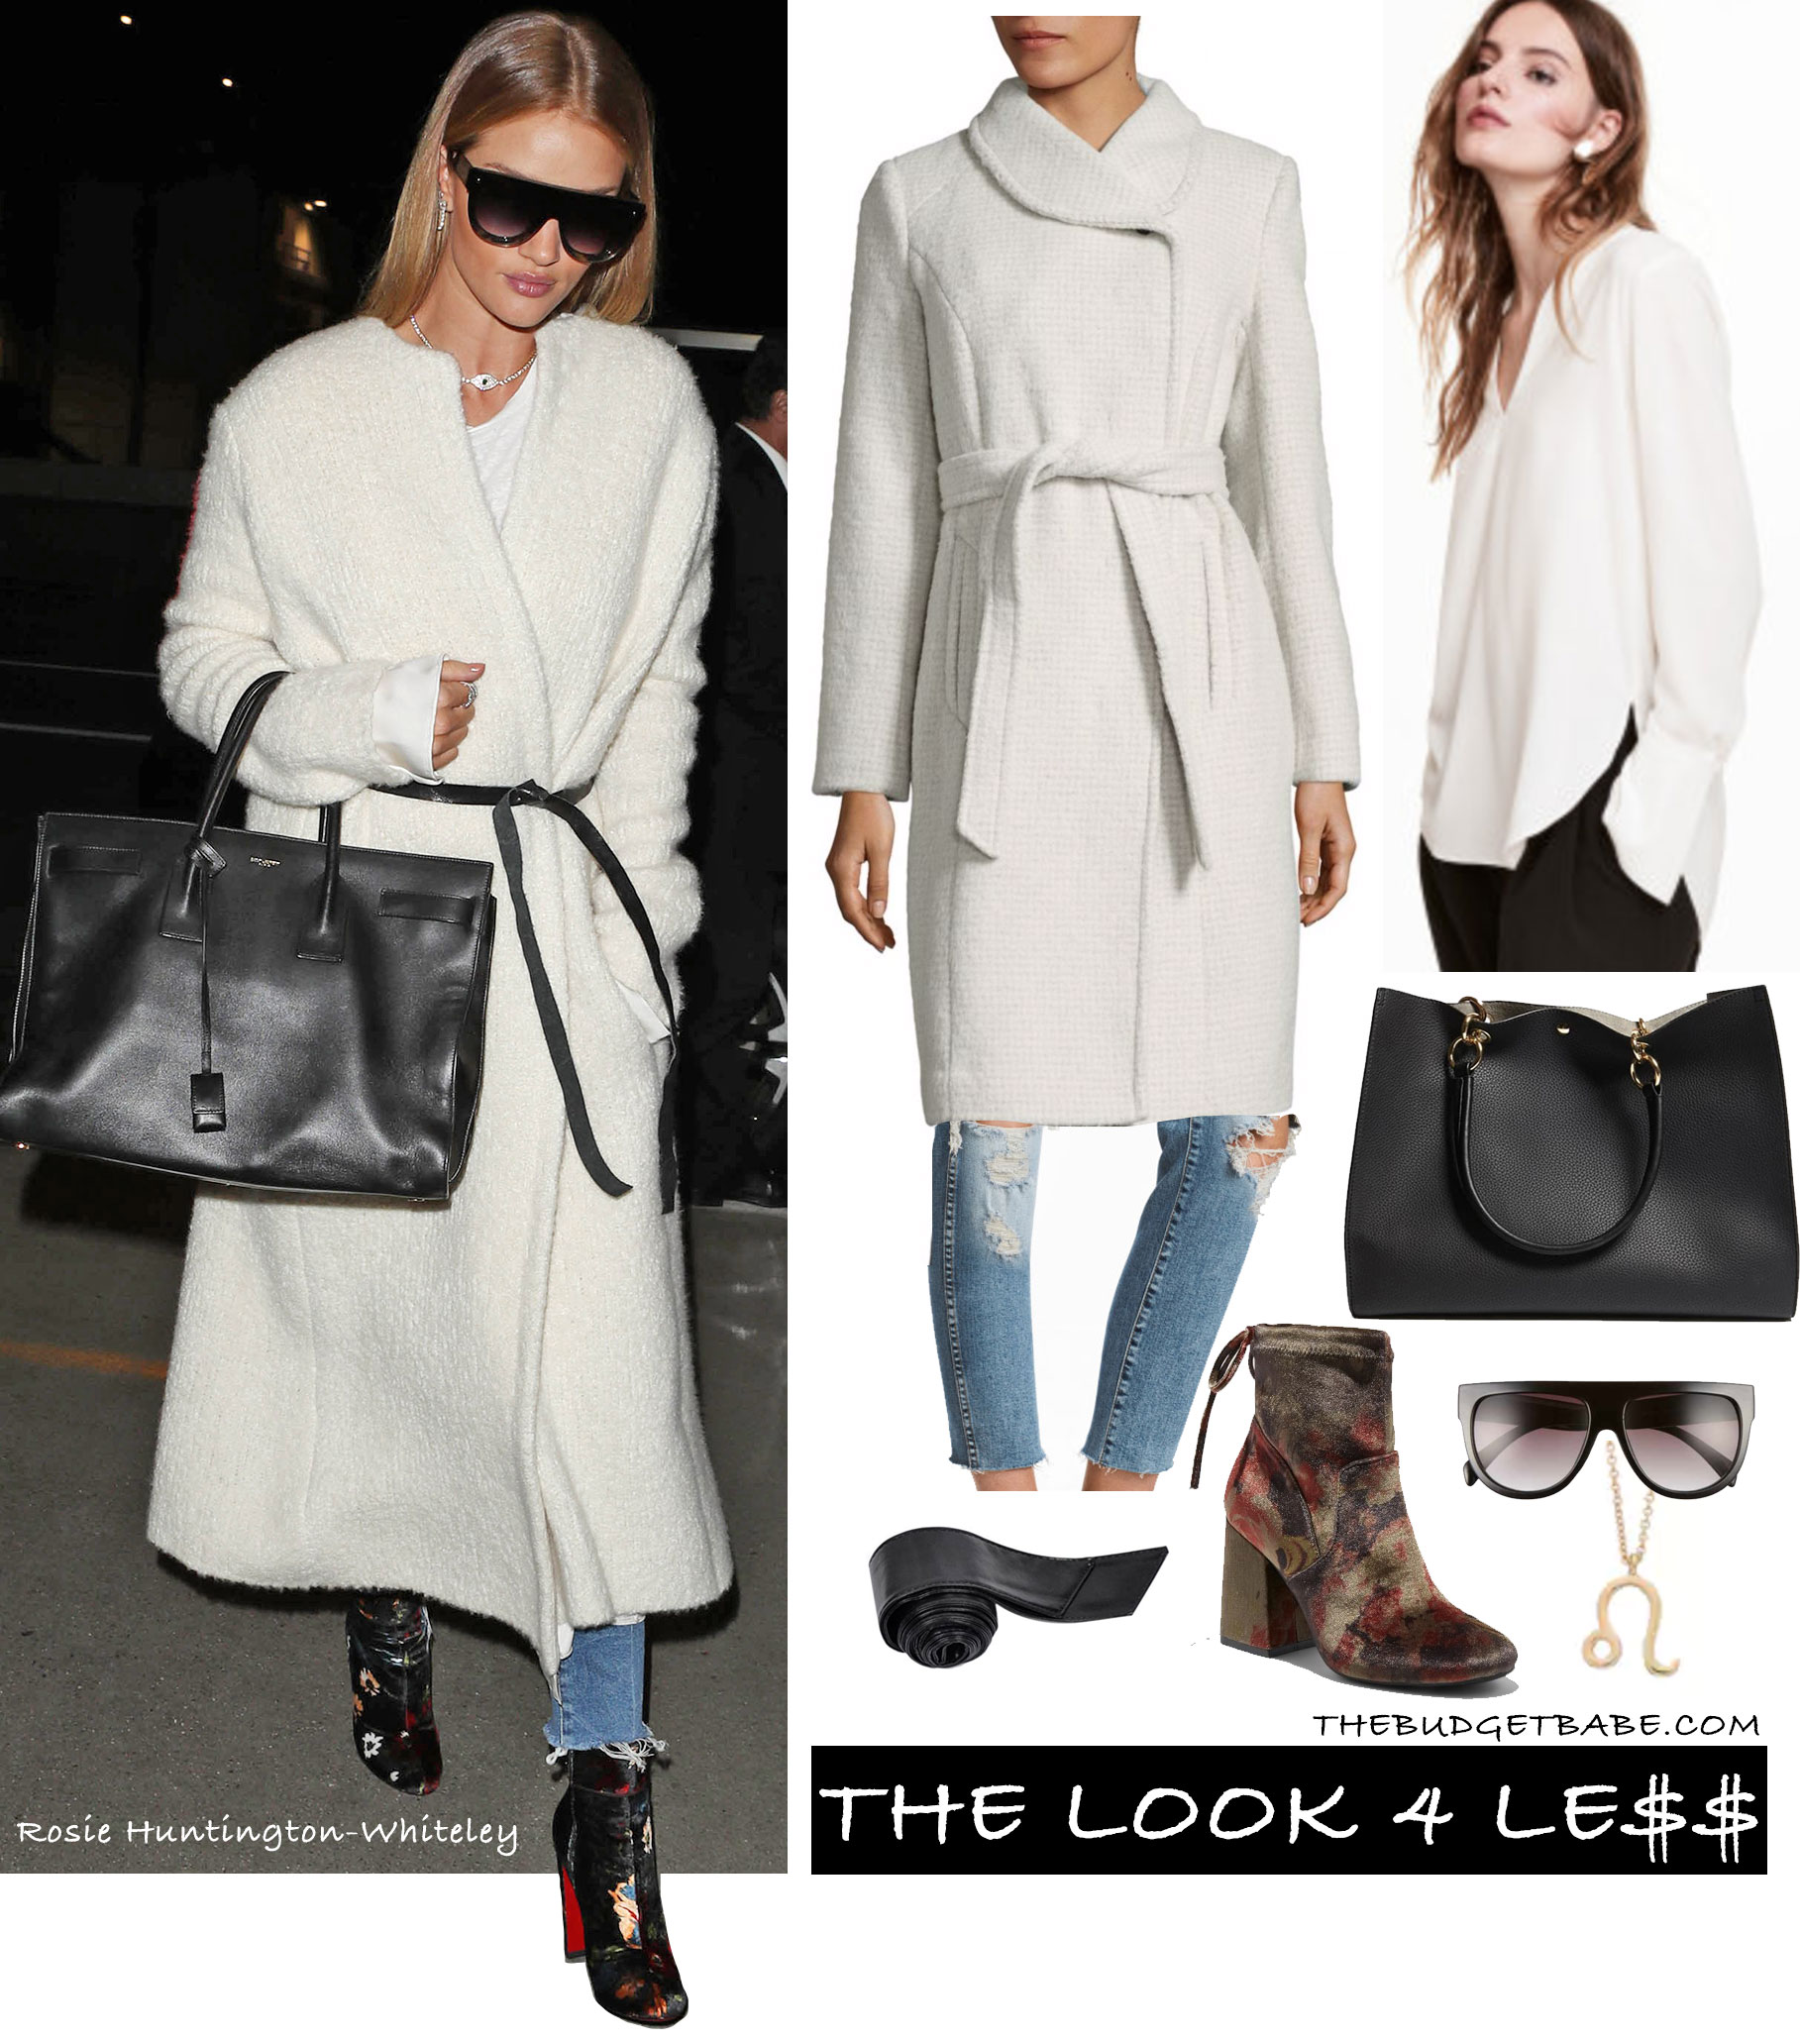 Rosie Huntington-Whiteley wears a white wrap coat by Isabel Marant with Paige jeans, Saint Laurent bag and Christian Louboutin shoes.